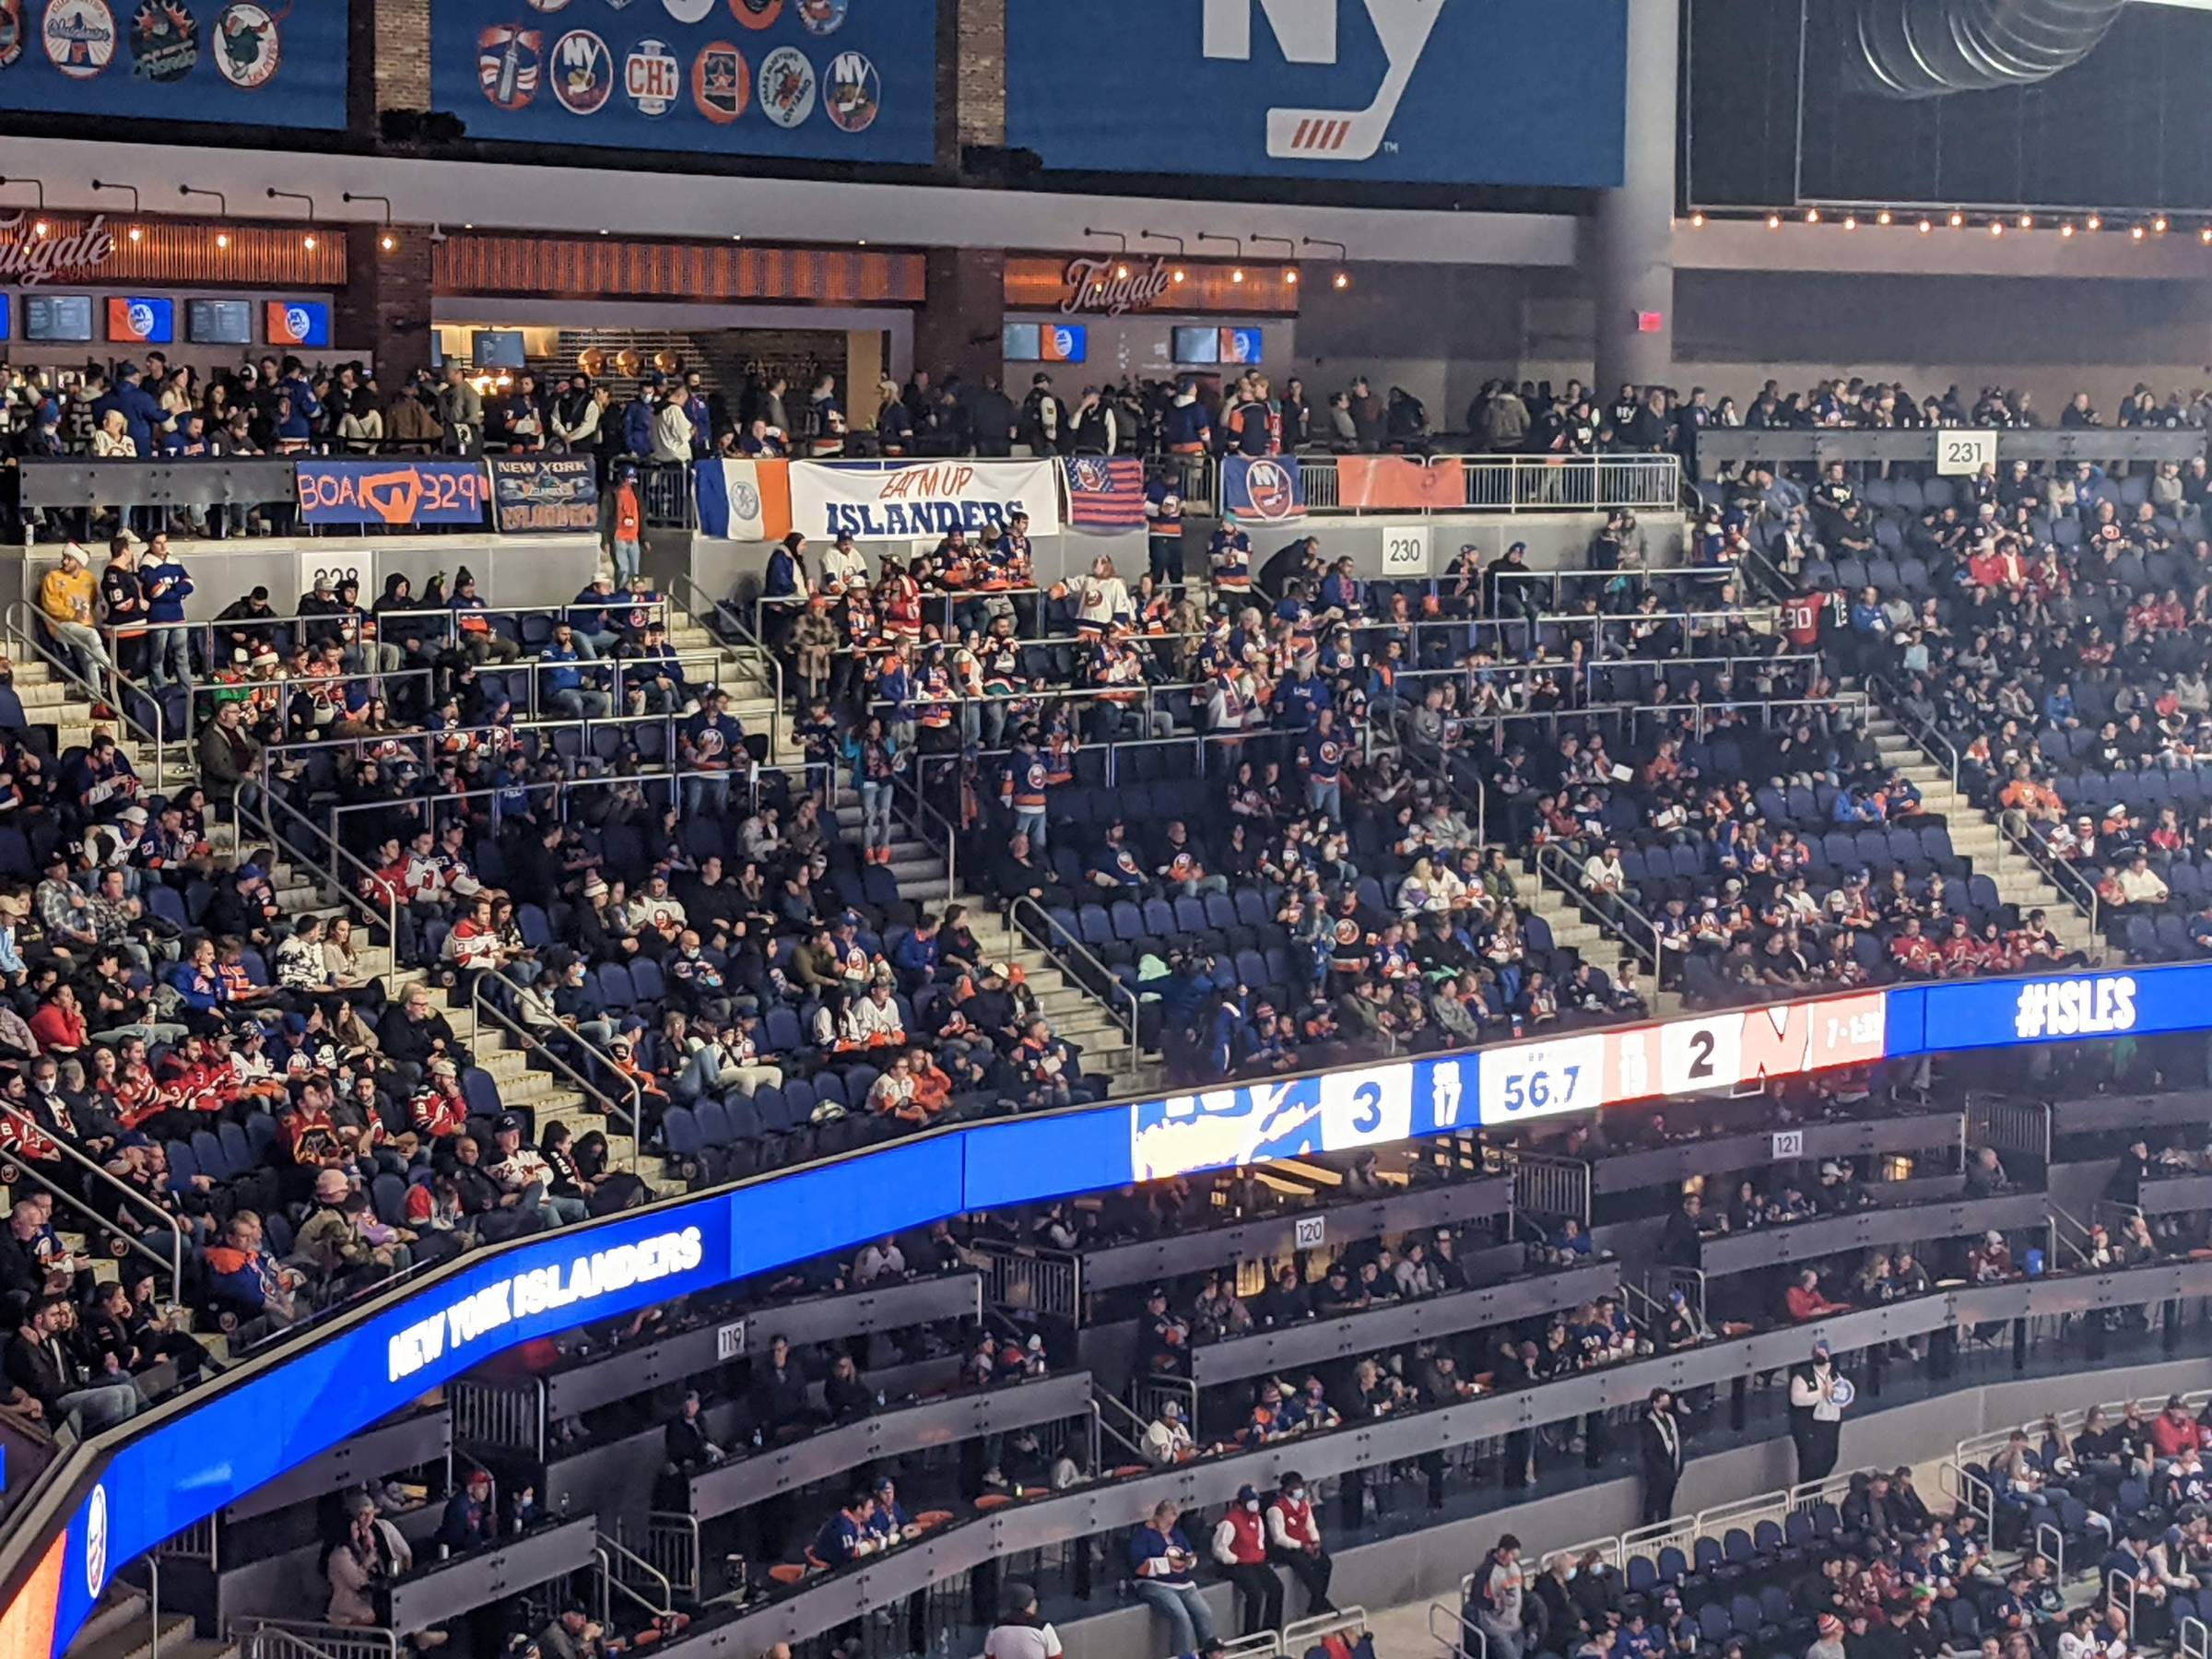 close up of section 329